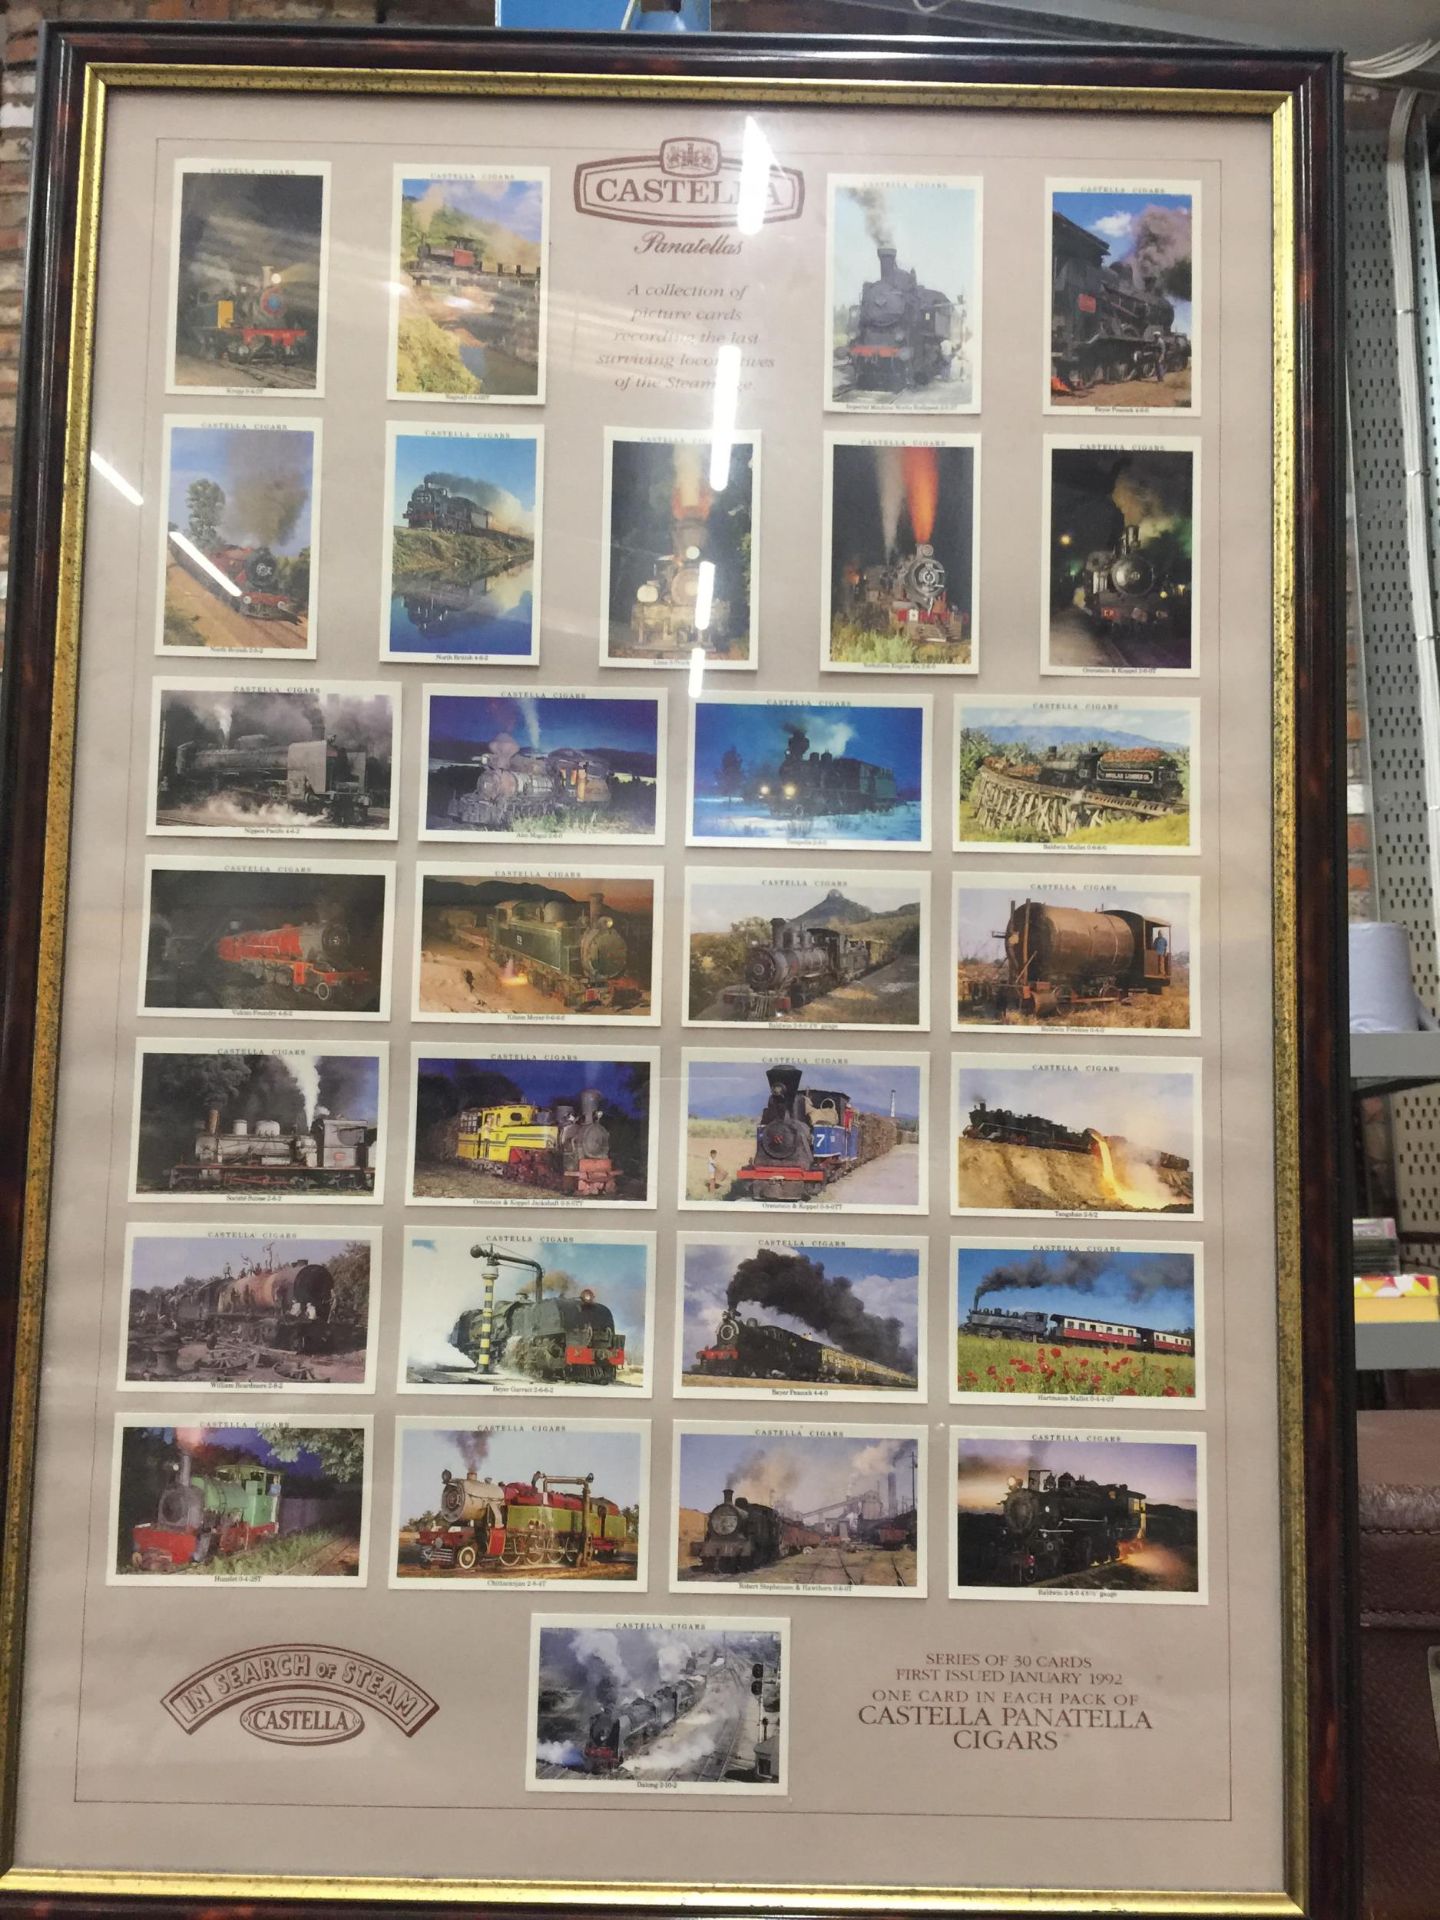 A FRAMED CASTELLA CIGARS STEAM ENGINE PICTURE CARD MONTAGE